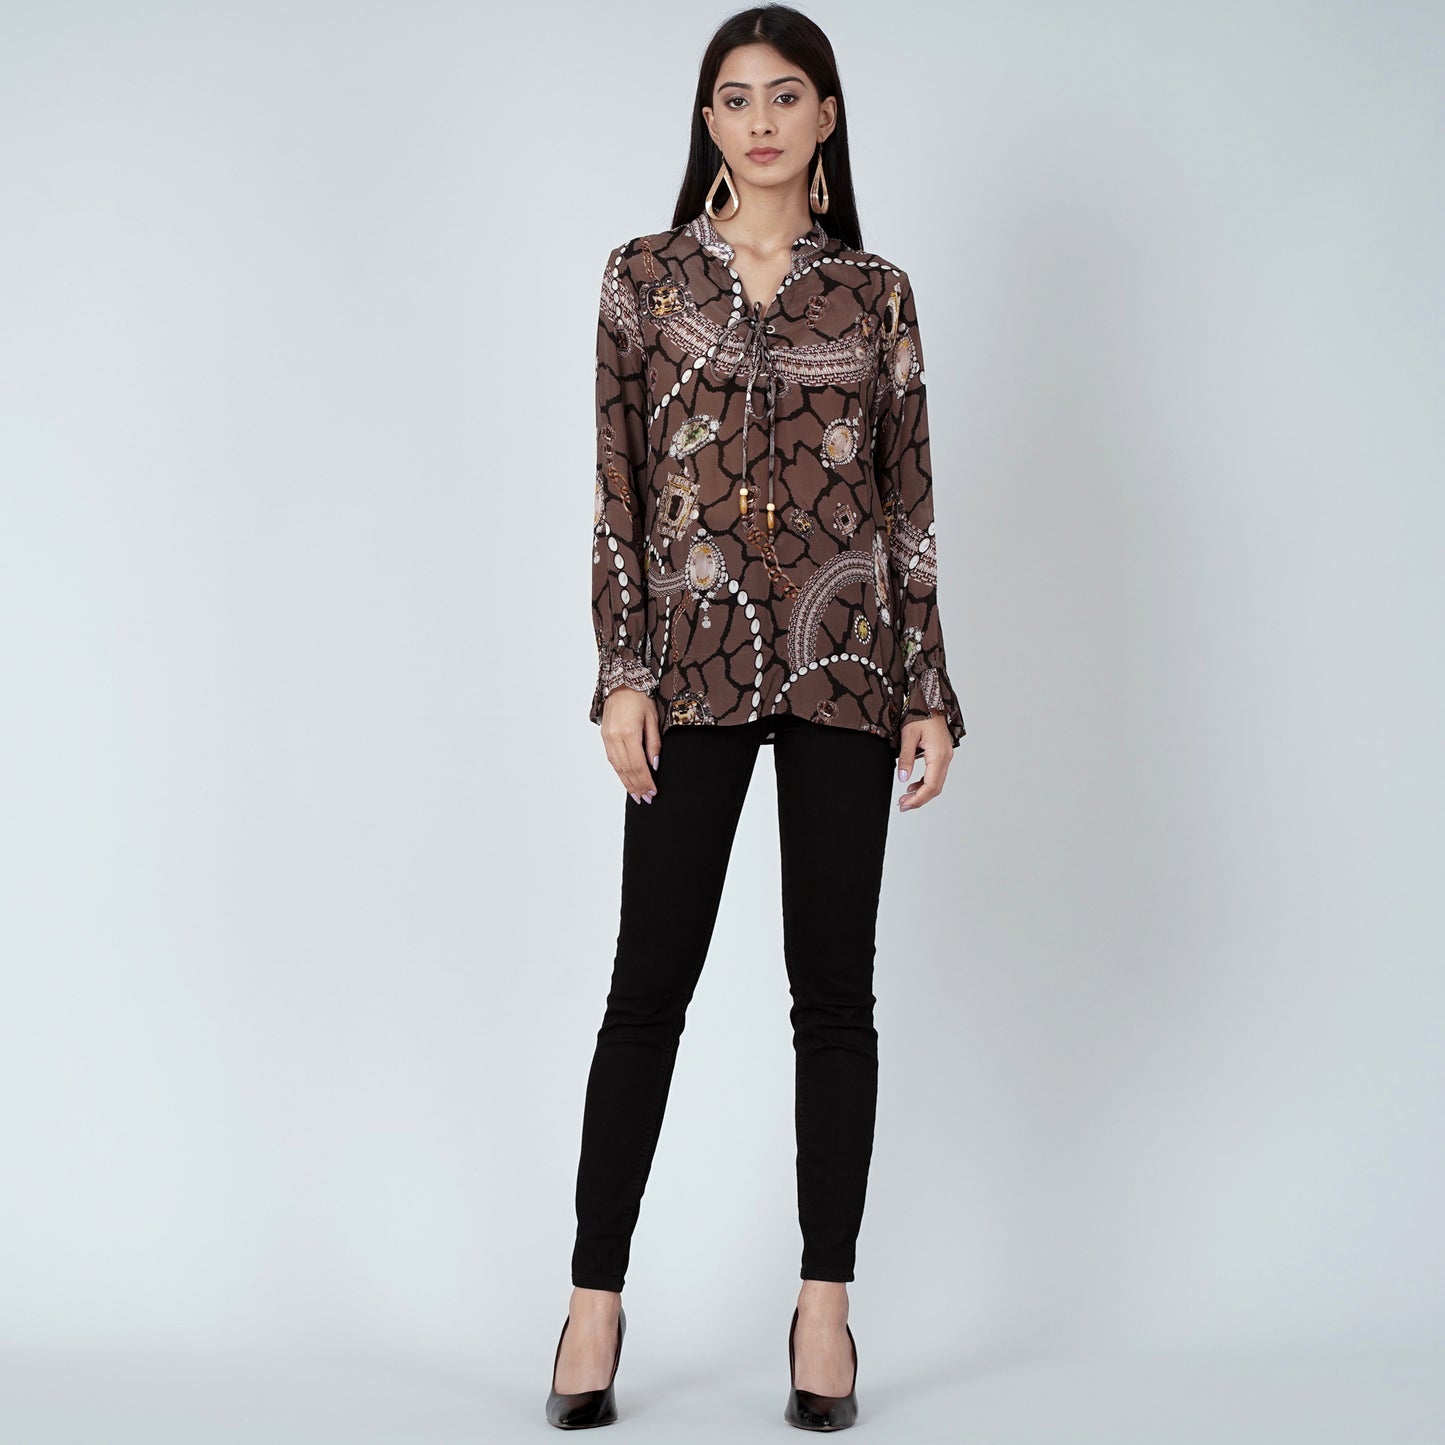 Brown Jewel Print Lace-Up Top